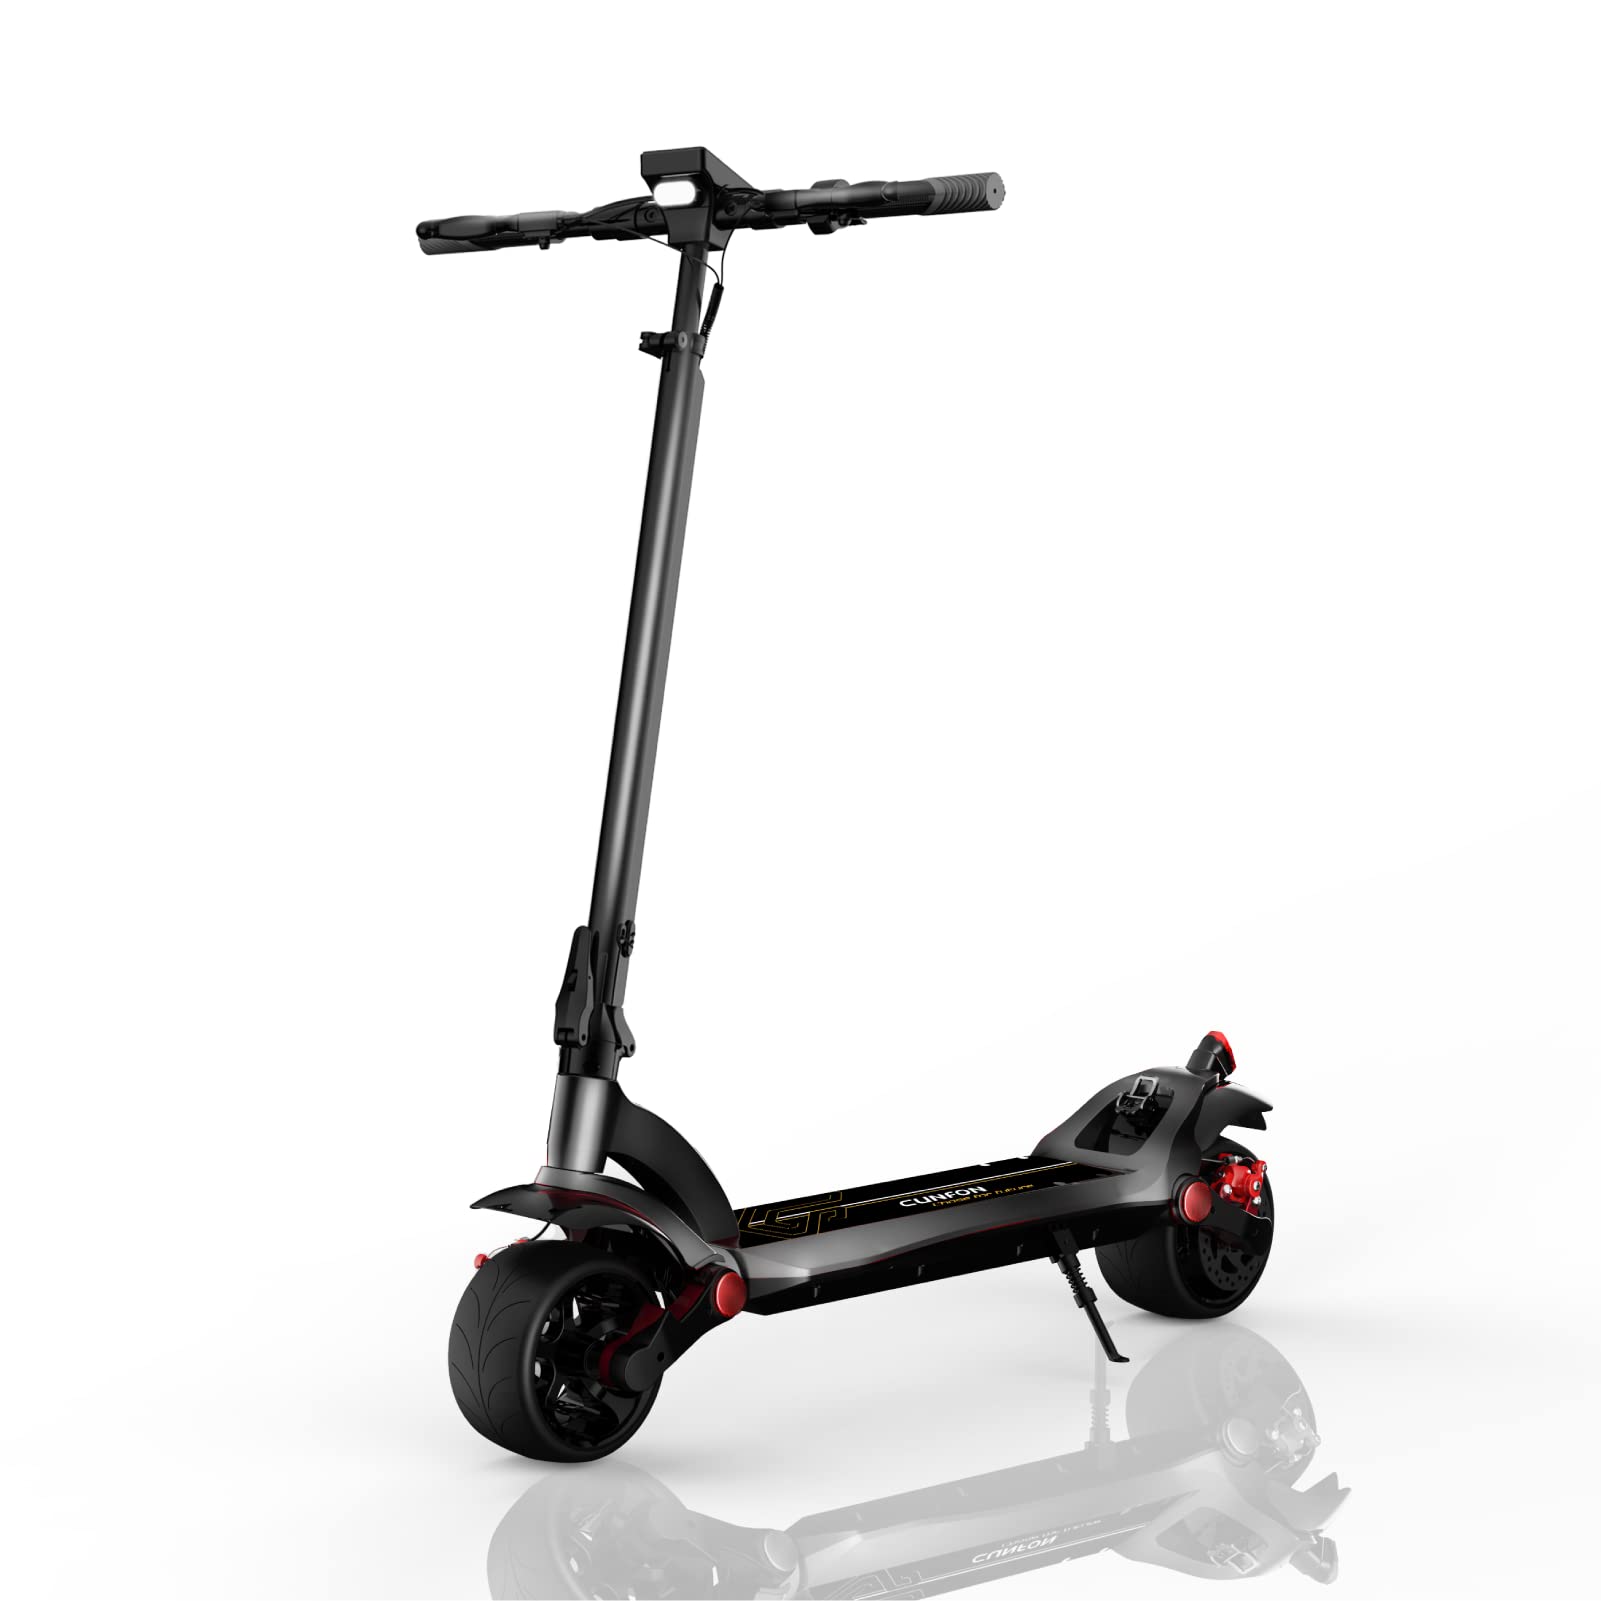 CUNFON Foldable Removable Seat 10 inch Electric Scooters Height Adjustable  Compatible CUNFON RZ800 800W Electric Scooter